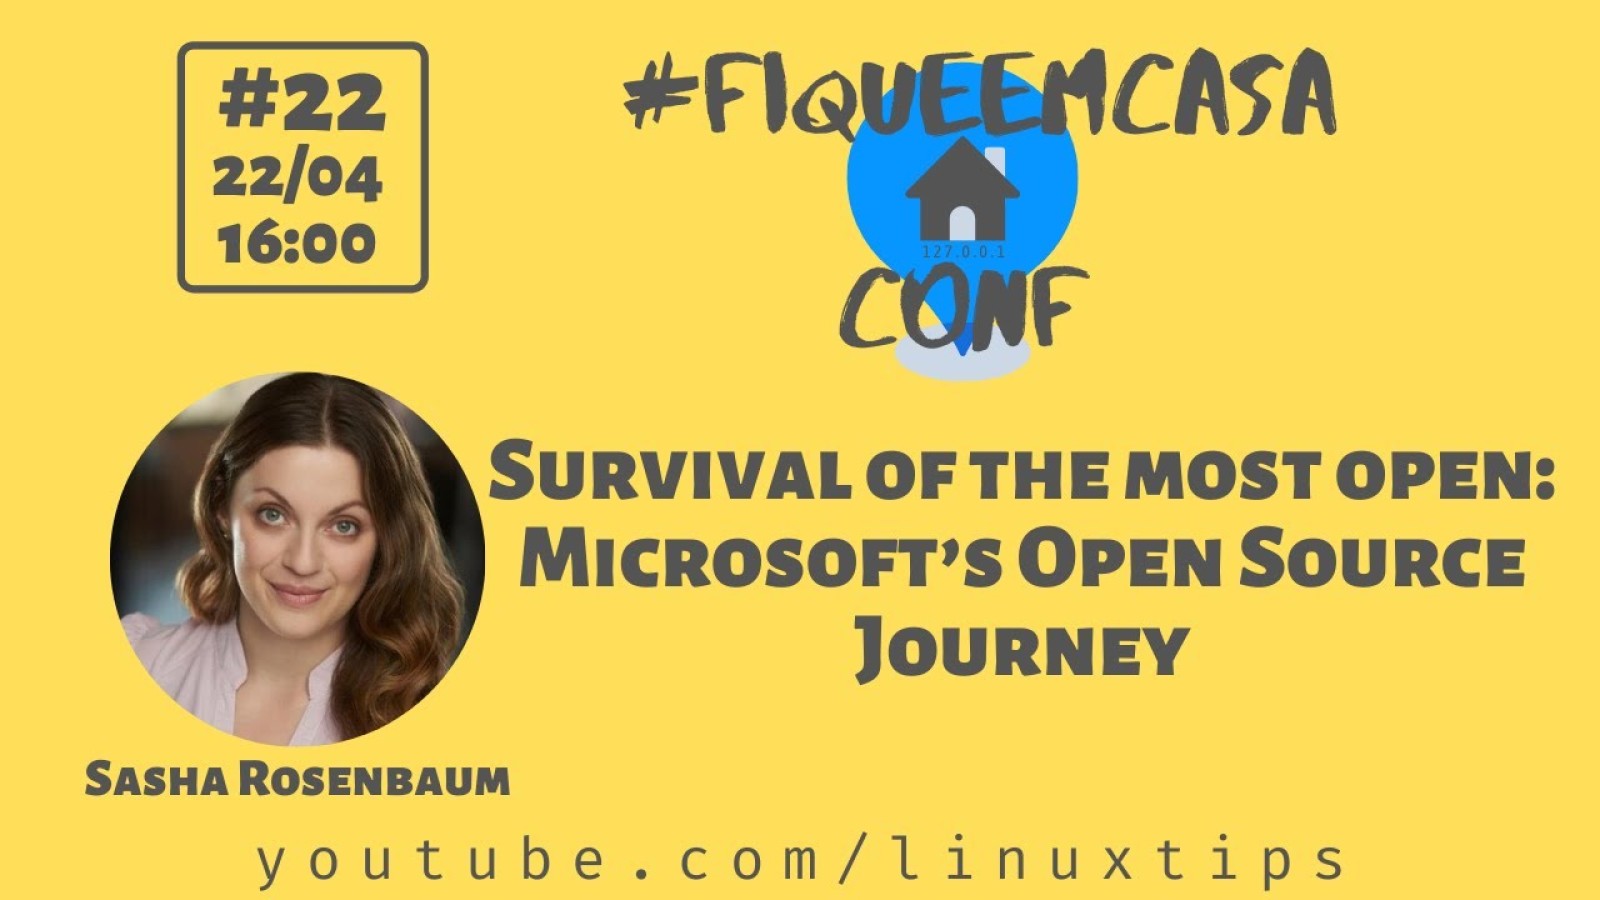 Survival of the most open: Microsoft’s Open Source Journey